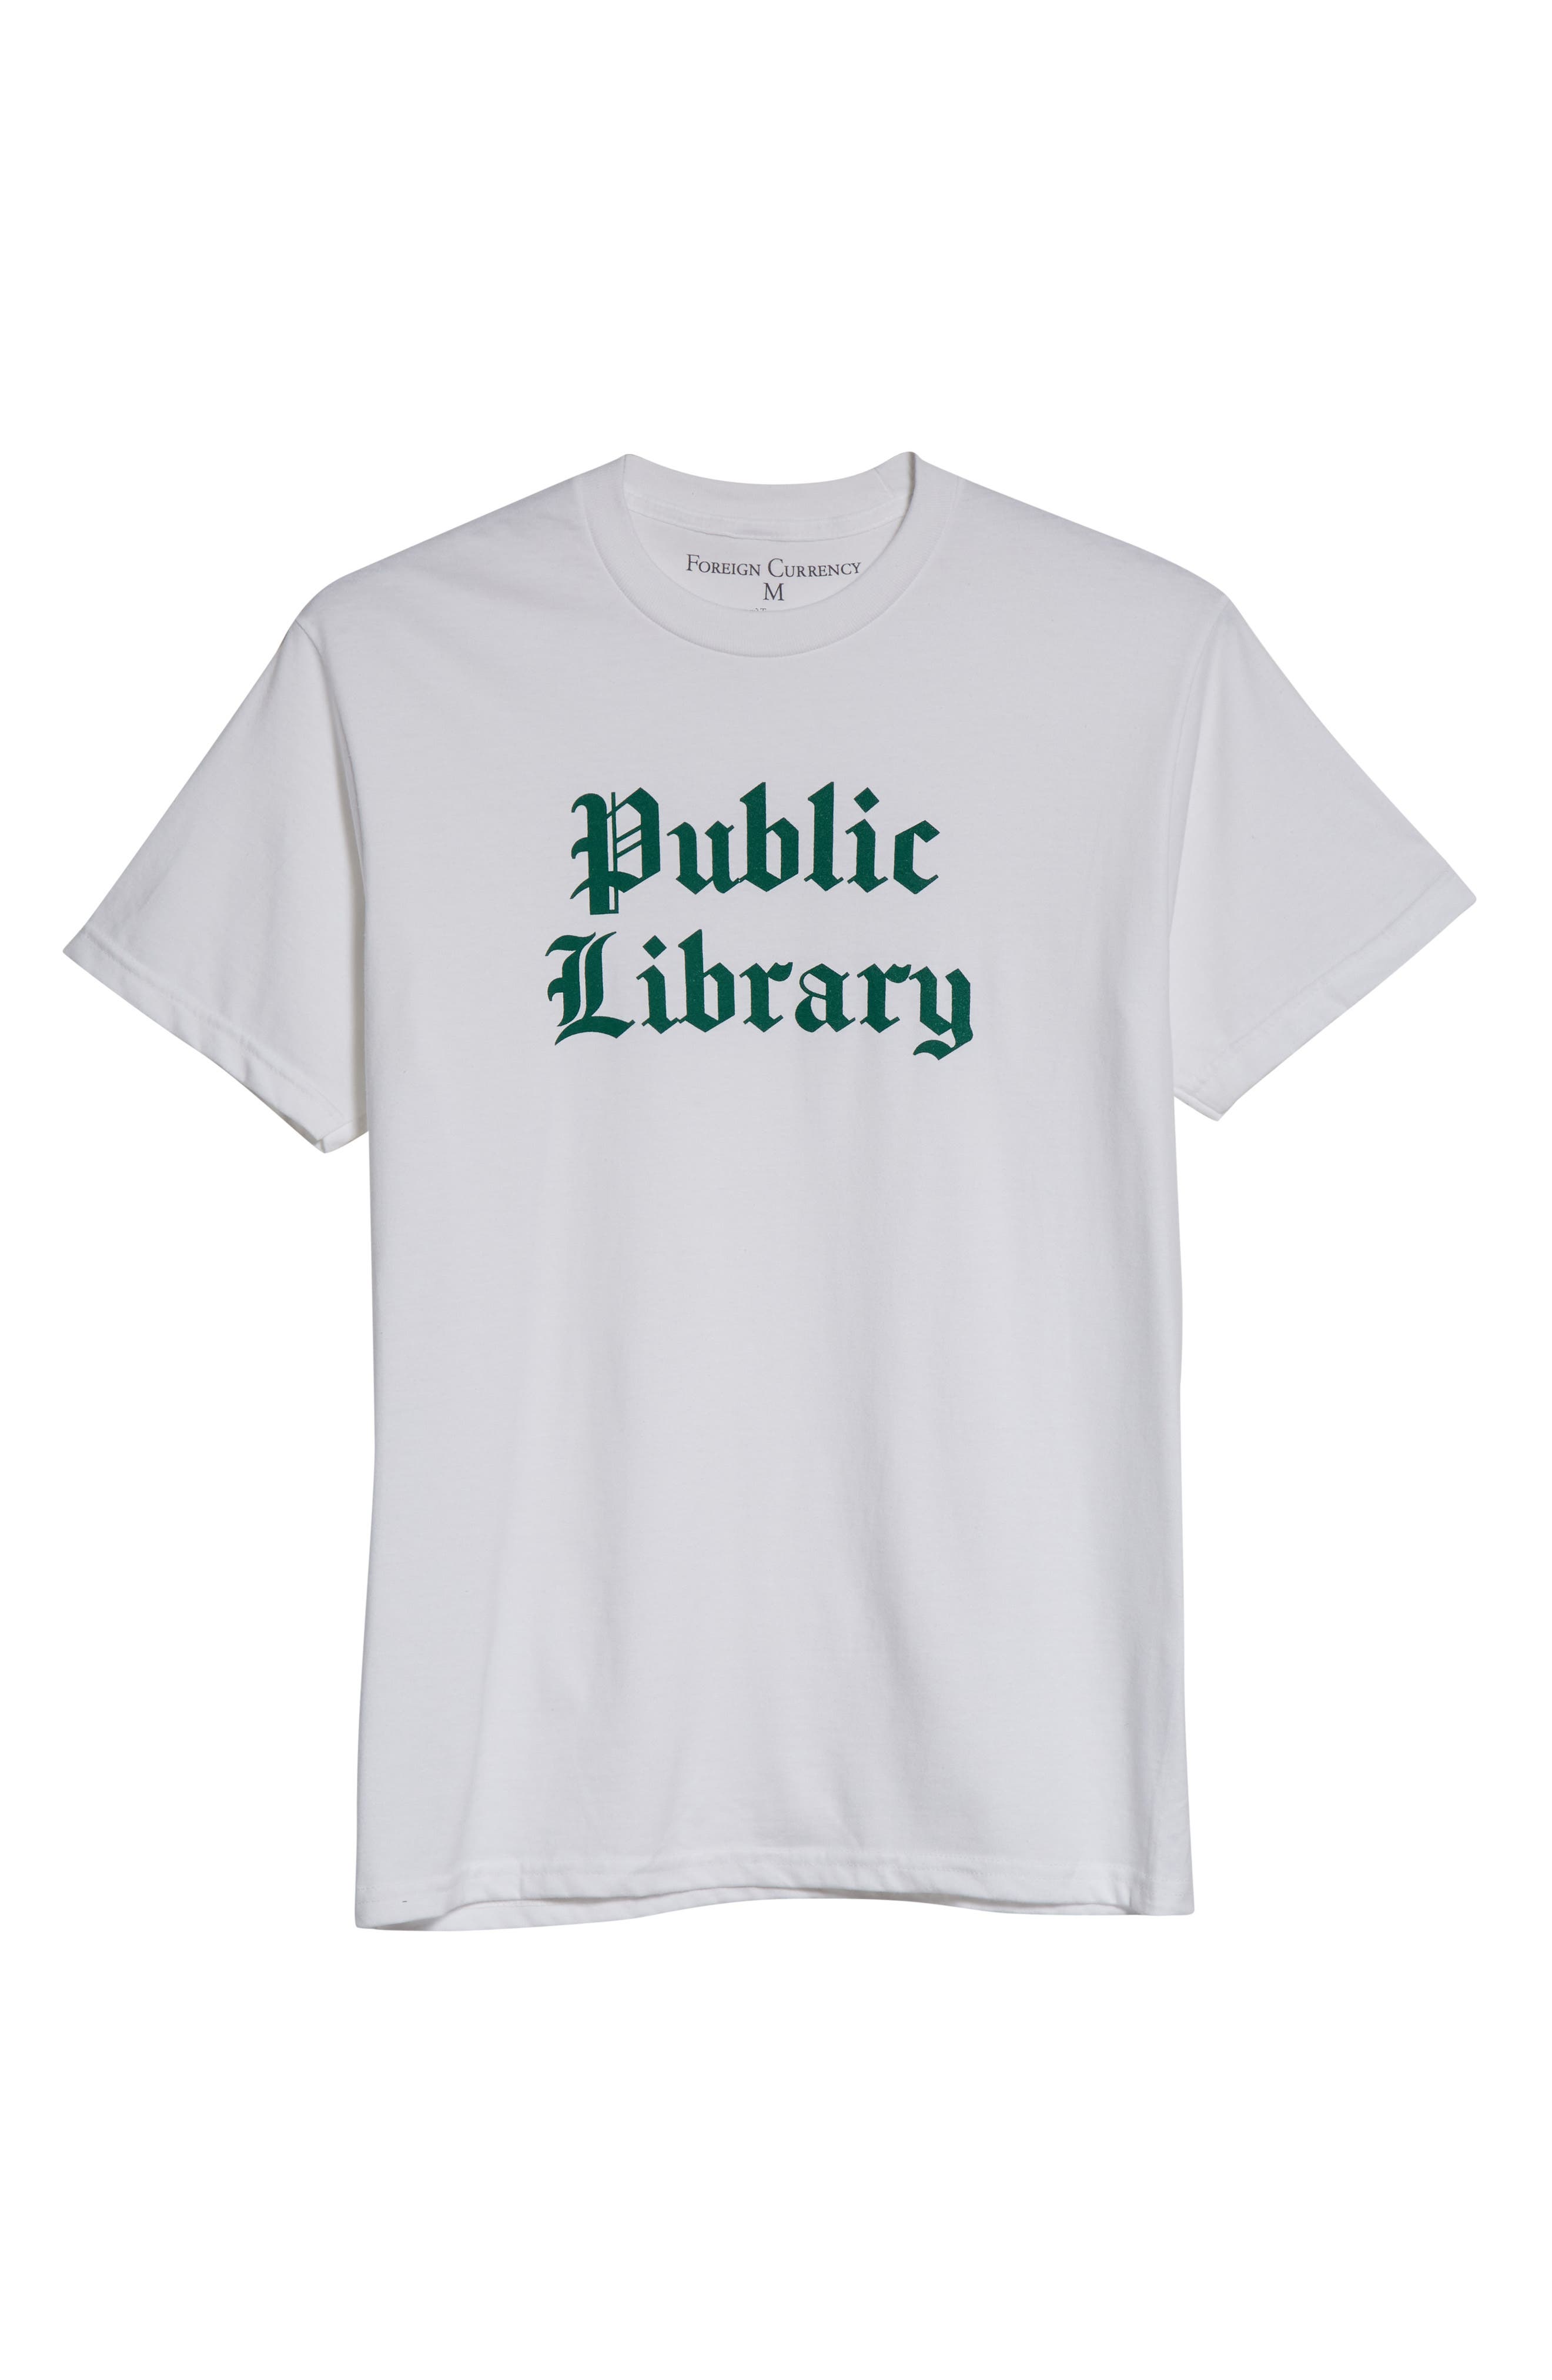 Foreign Currency Public Library Graphic Tee